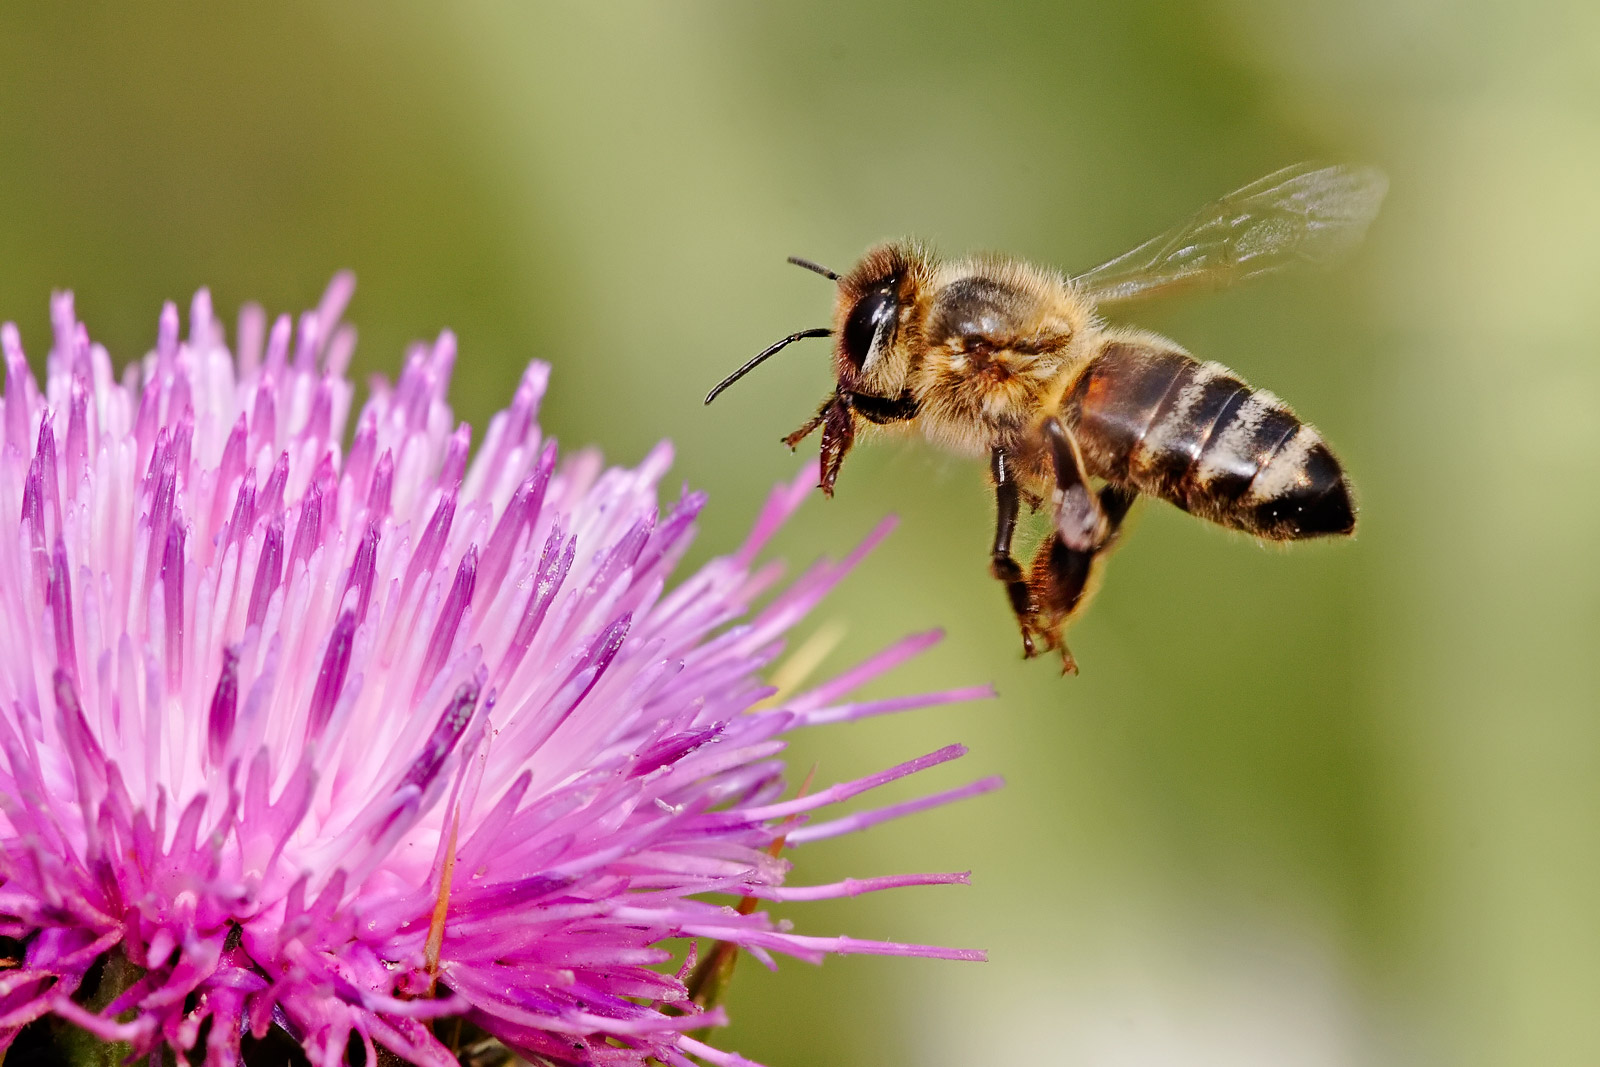 7. Honey Bees can comunicate with eachother through dance